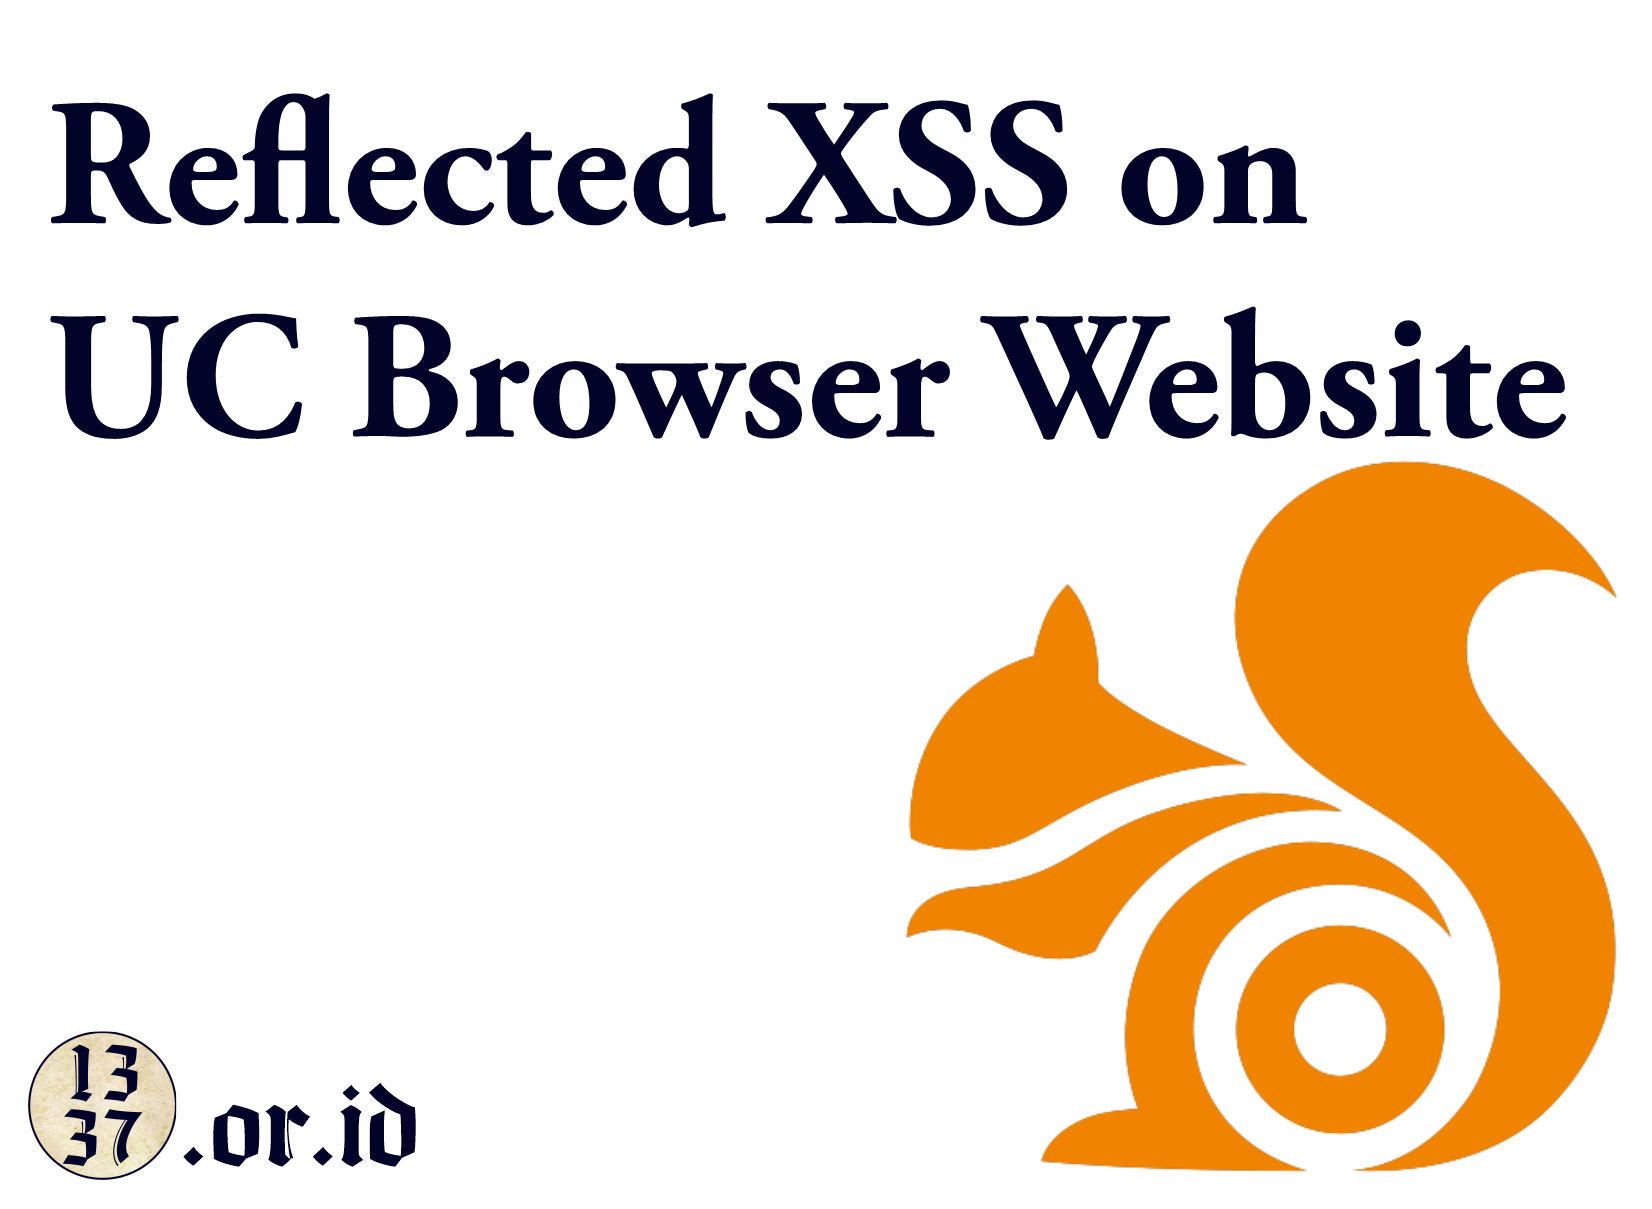 Reflected XSS on UC Browser Website